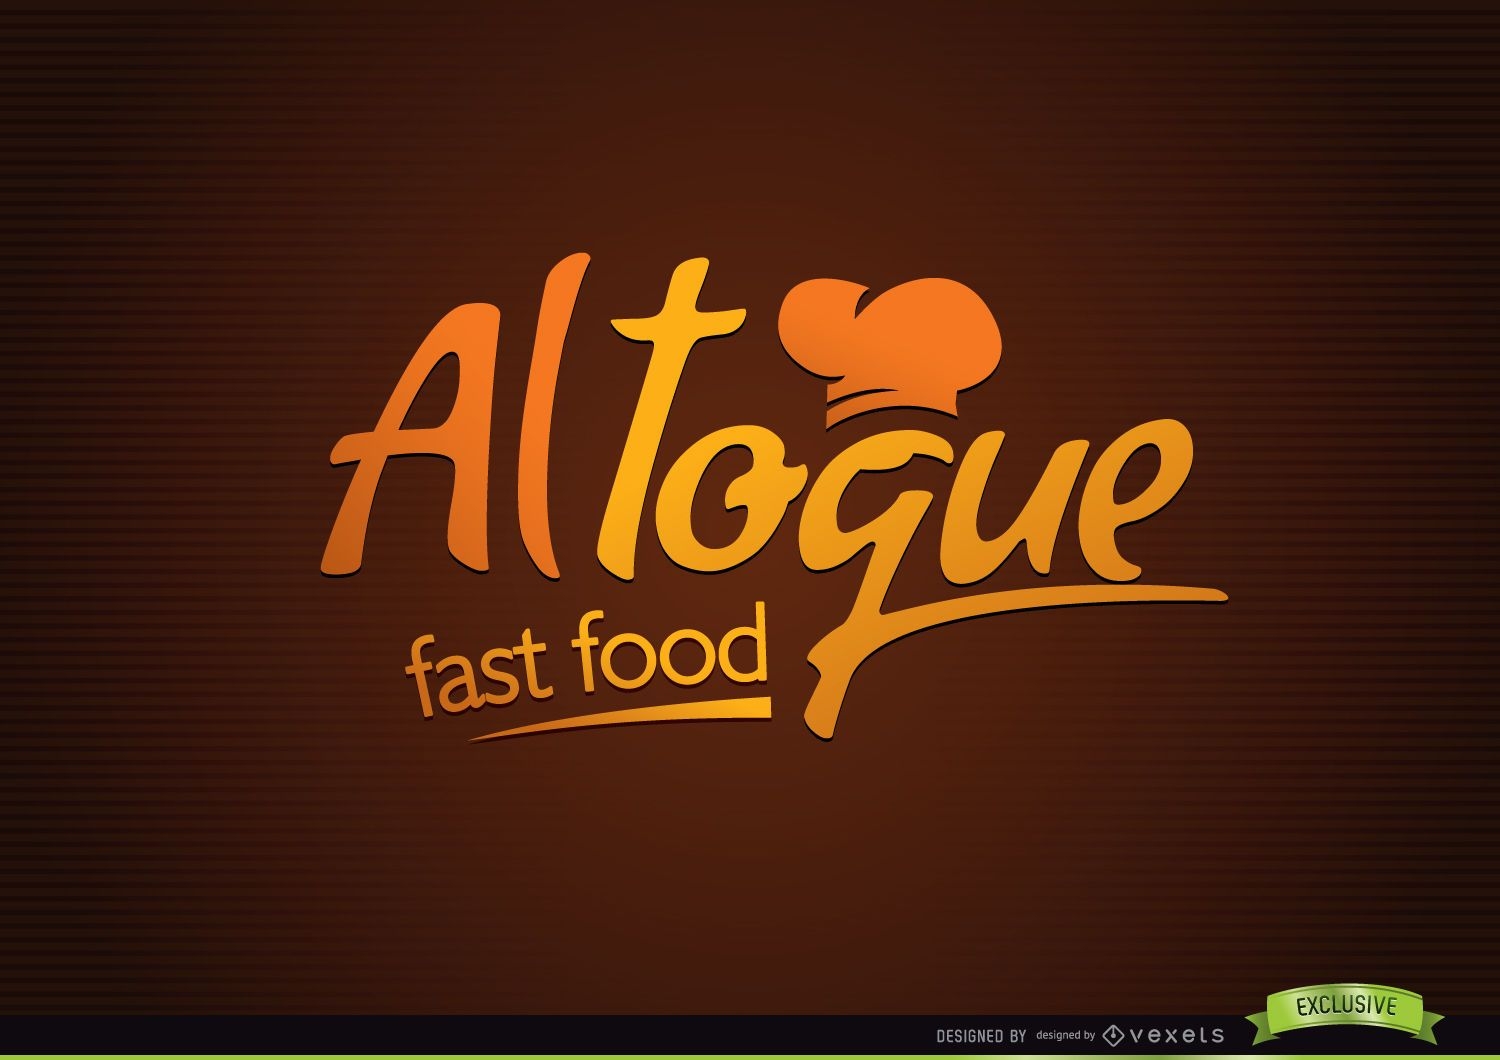 Fast Food Typographical Creative Logo